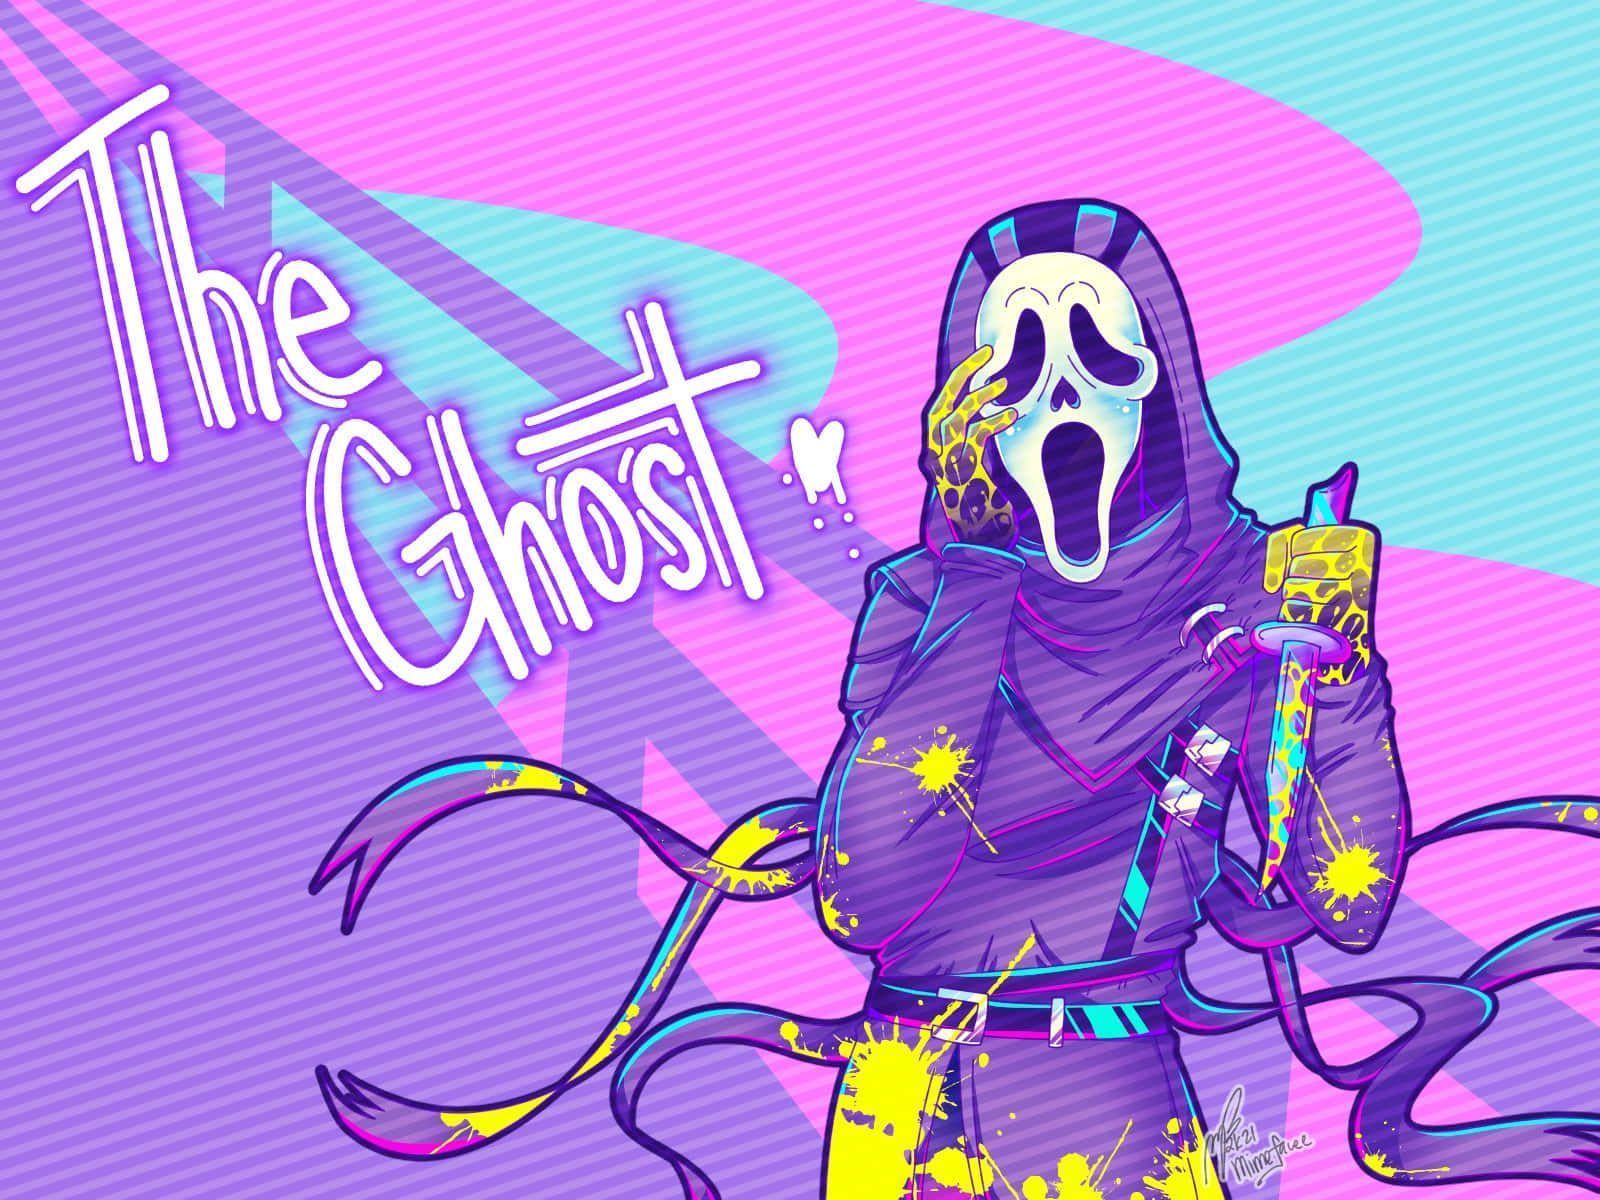 Download Cute Ghostface In Colorful Background Wallpaper